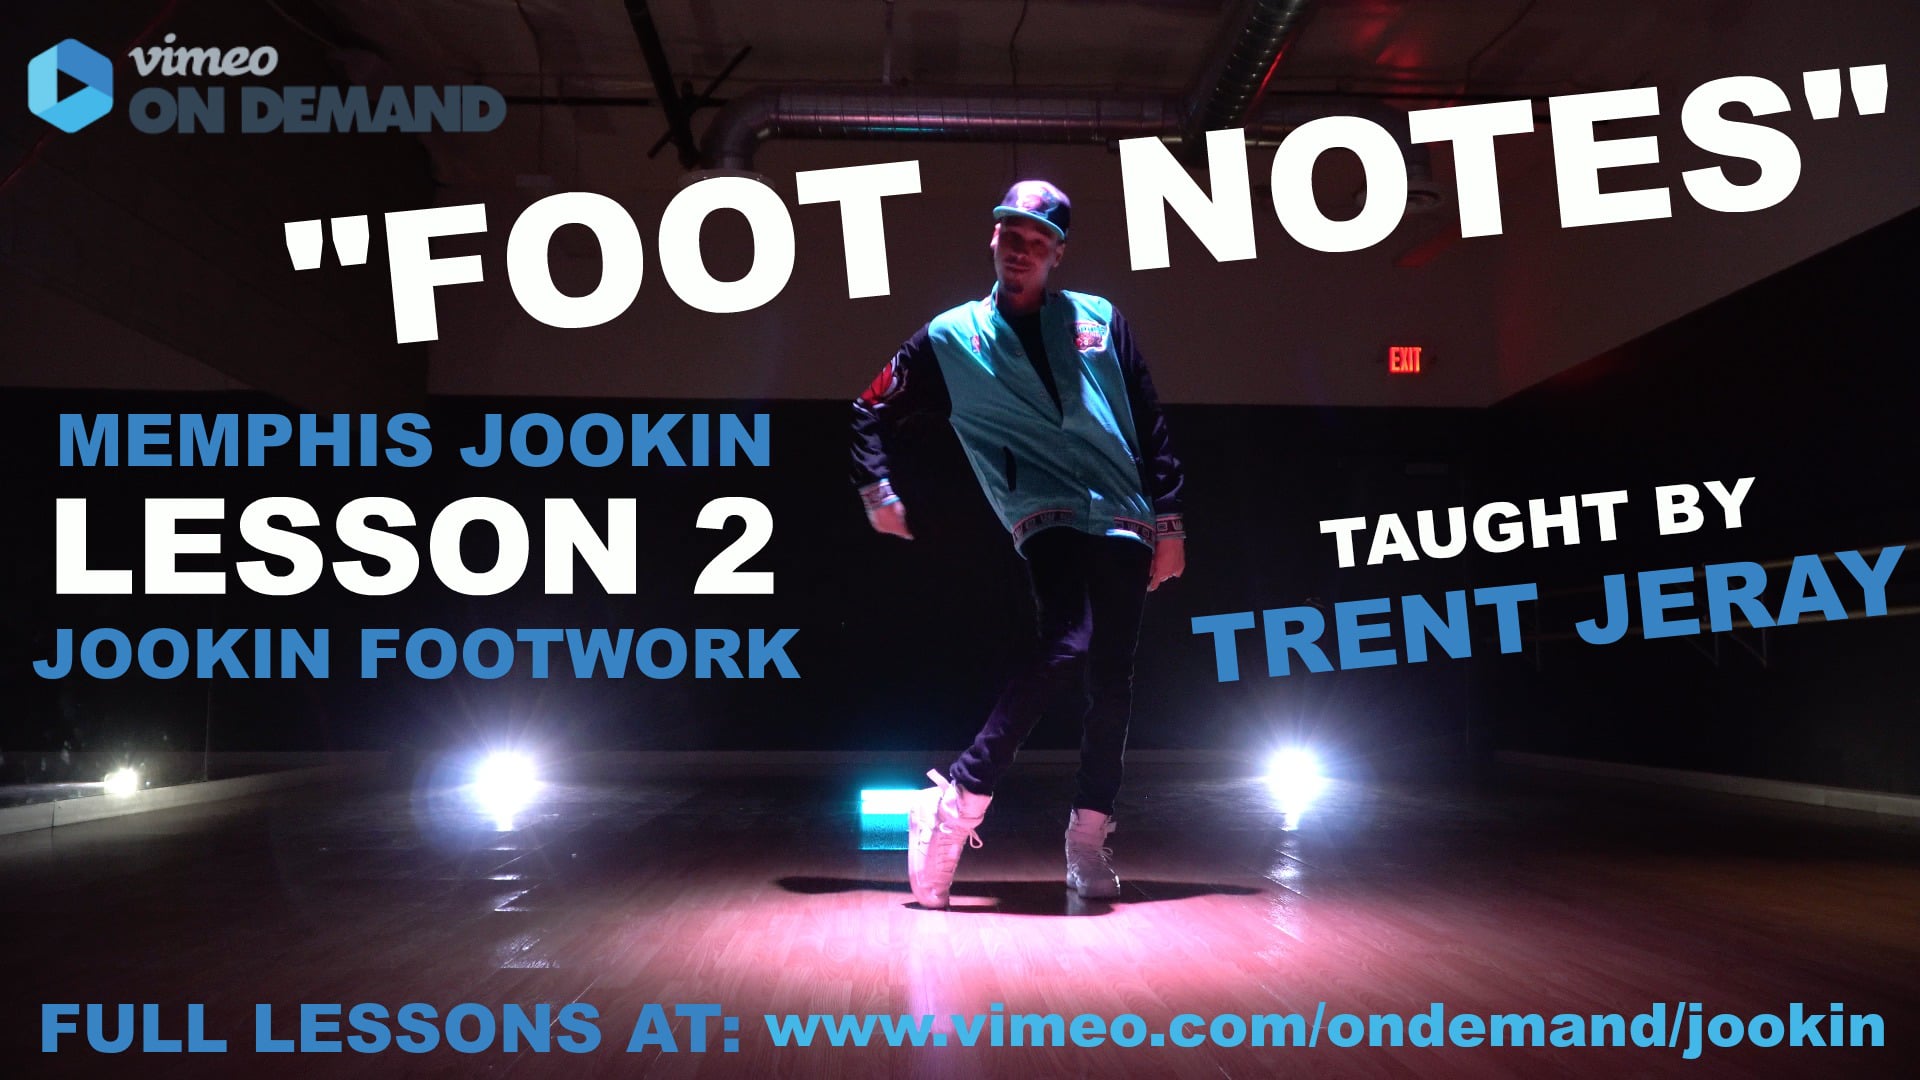 Watch JOOKIN DANCE STYLE Lessons Taught by Trent Jeray of World of Dance on NBC Online Vimeo On Demand on Vimeo